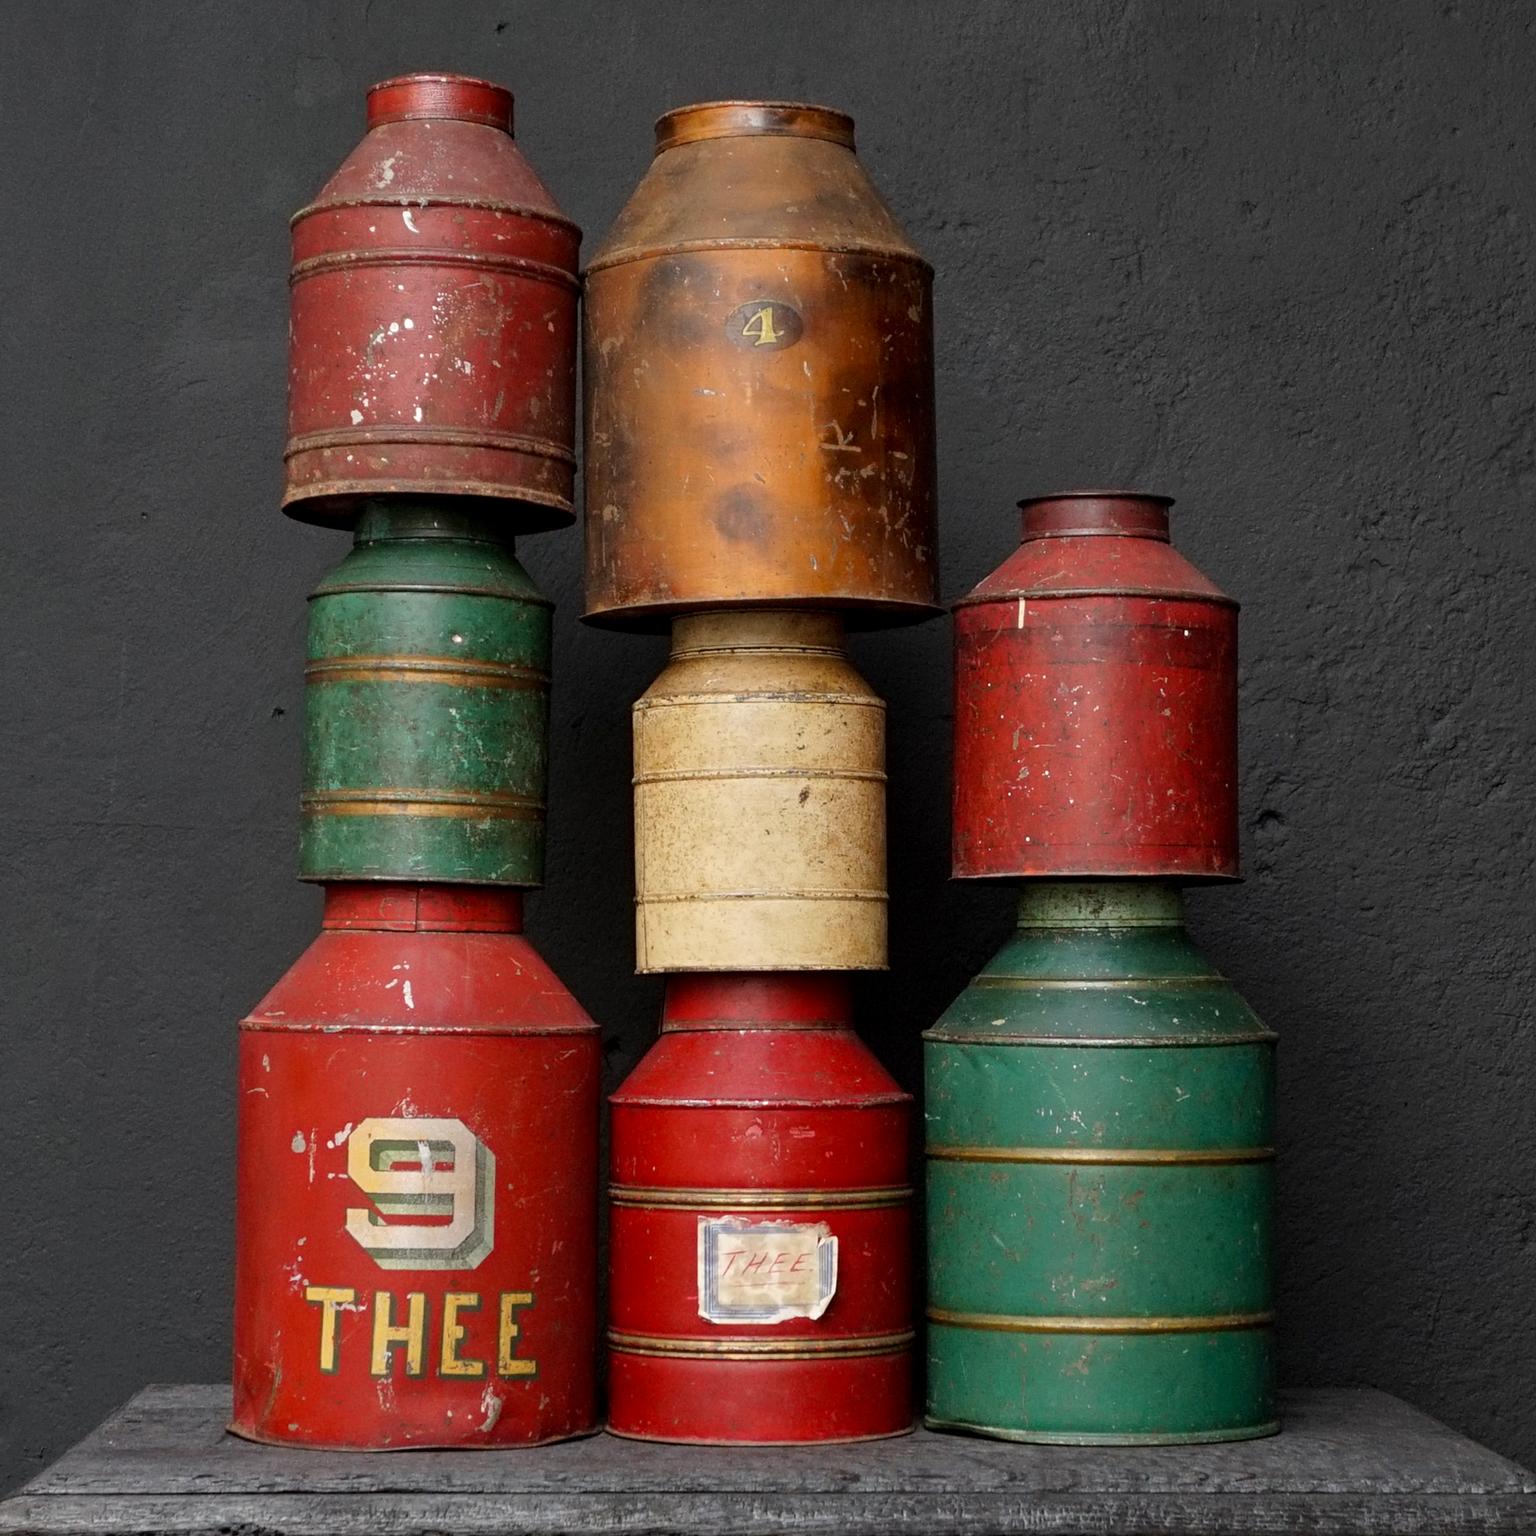 Highly collectable and very decorative this set of 8 antique Dutch tea tins or caddies.
These were used to keep tea in at the grocer's. Thee means tea in Dutch.

Big red tin with number 9 and THEE on it, 34cm high, diameter 22cm (13.4